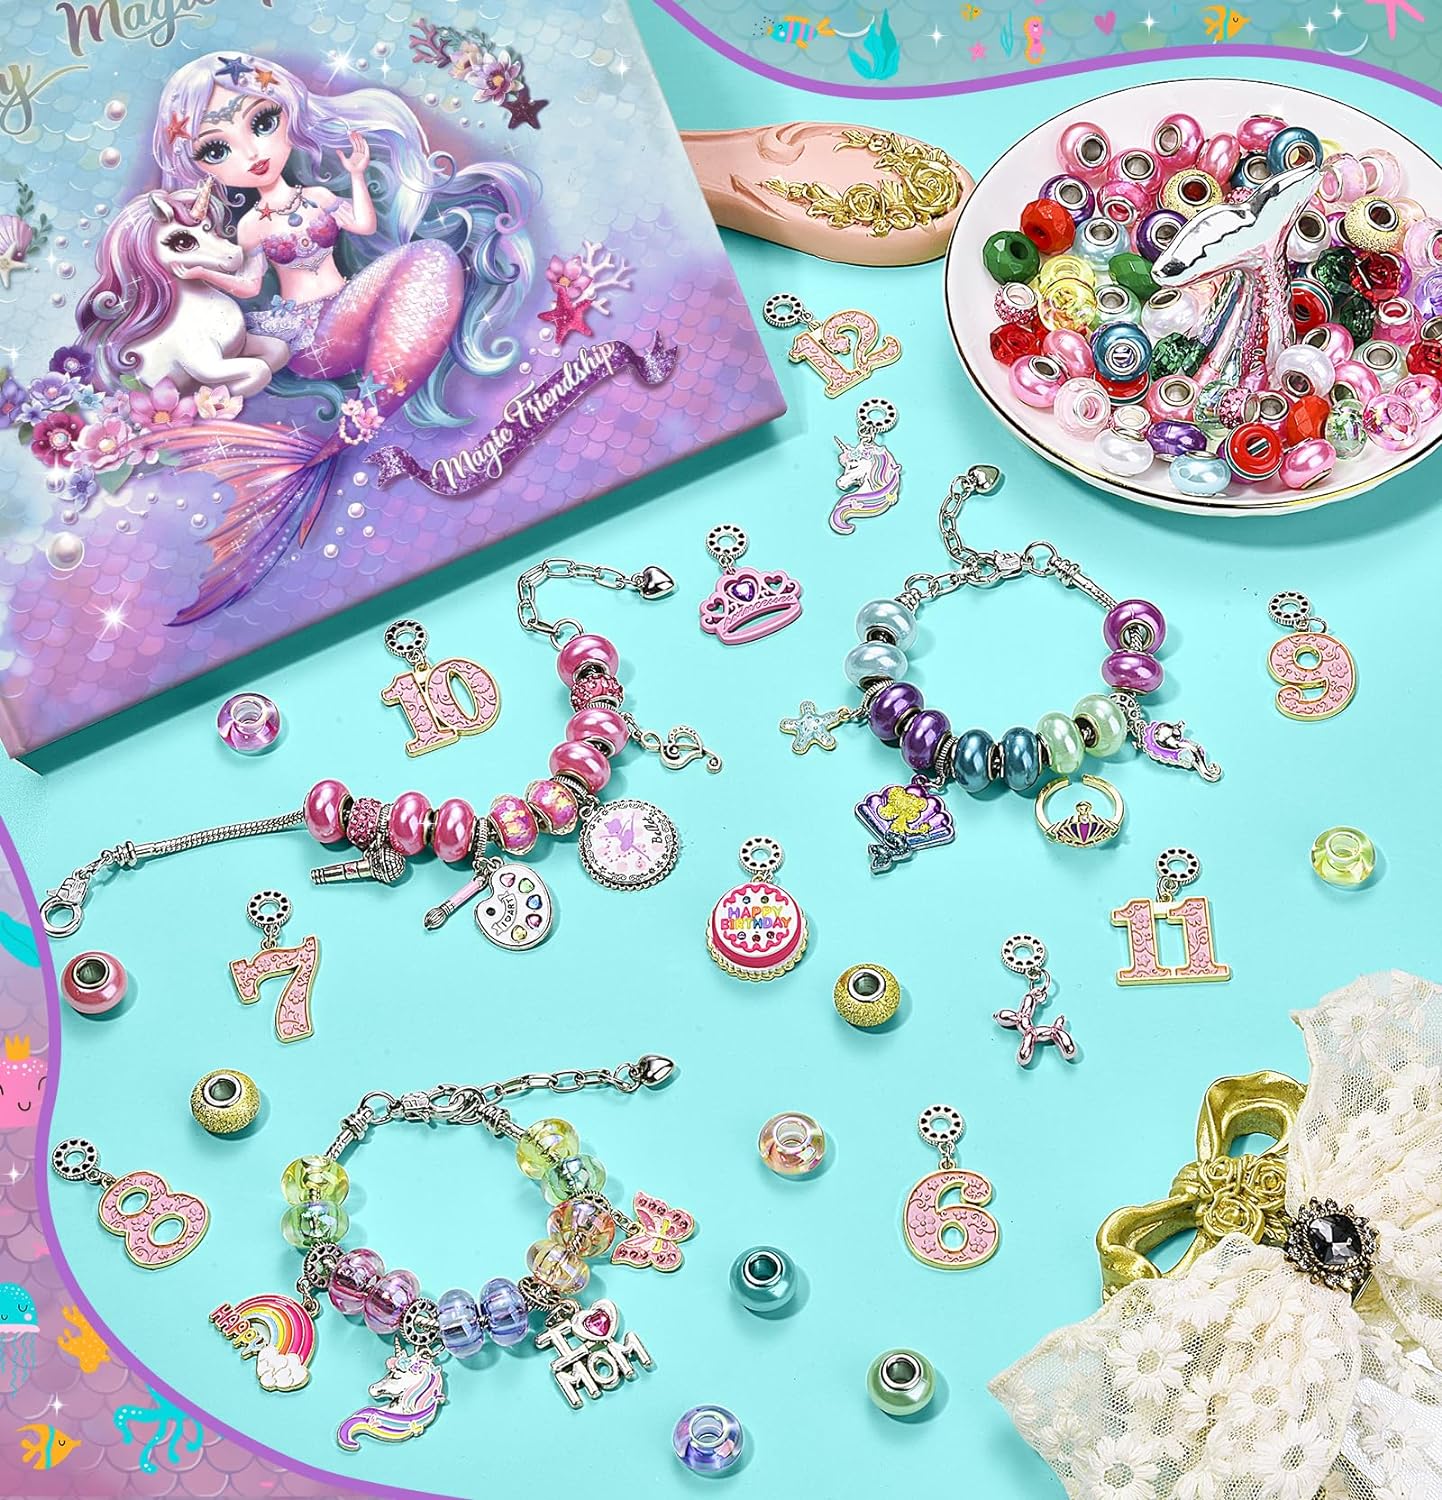 BDBKYWY Charm Bracelet Making Kit & Unicorn/Mermaid Girl Toy- ideal Crafts for Ages 8-12 Girls who Inspire Imagination and Create Magic with Art Set and Jewelry Making Kit